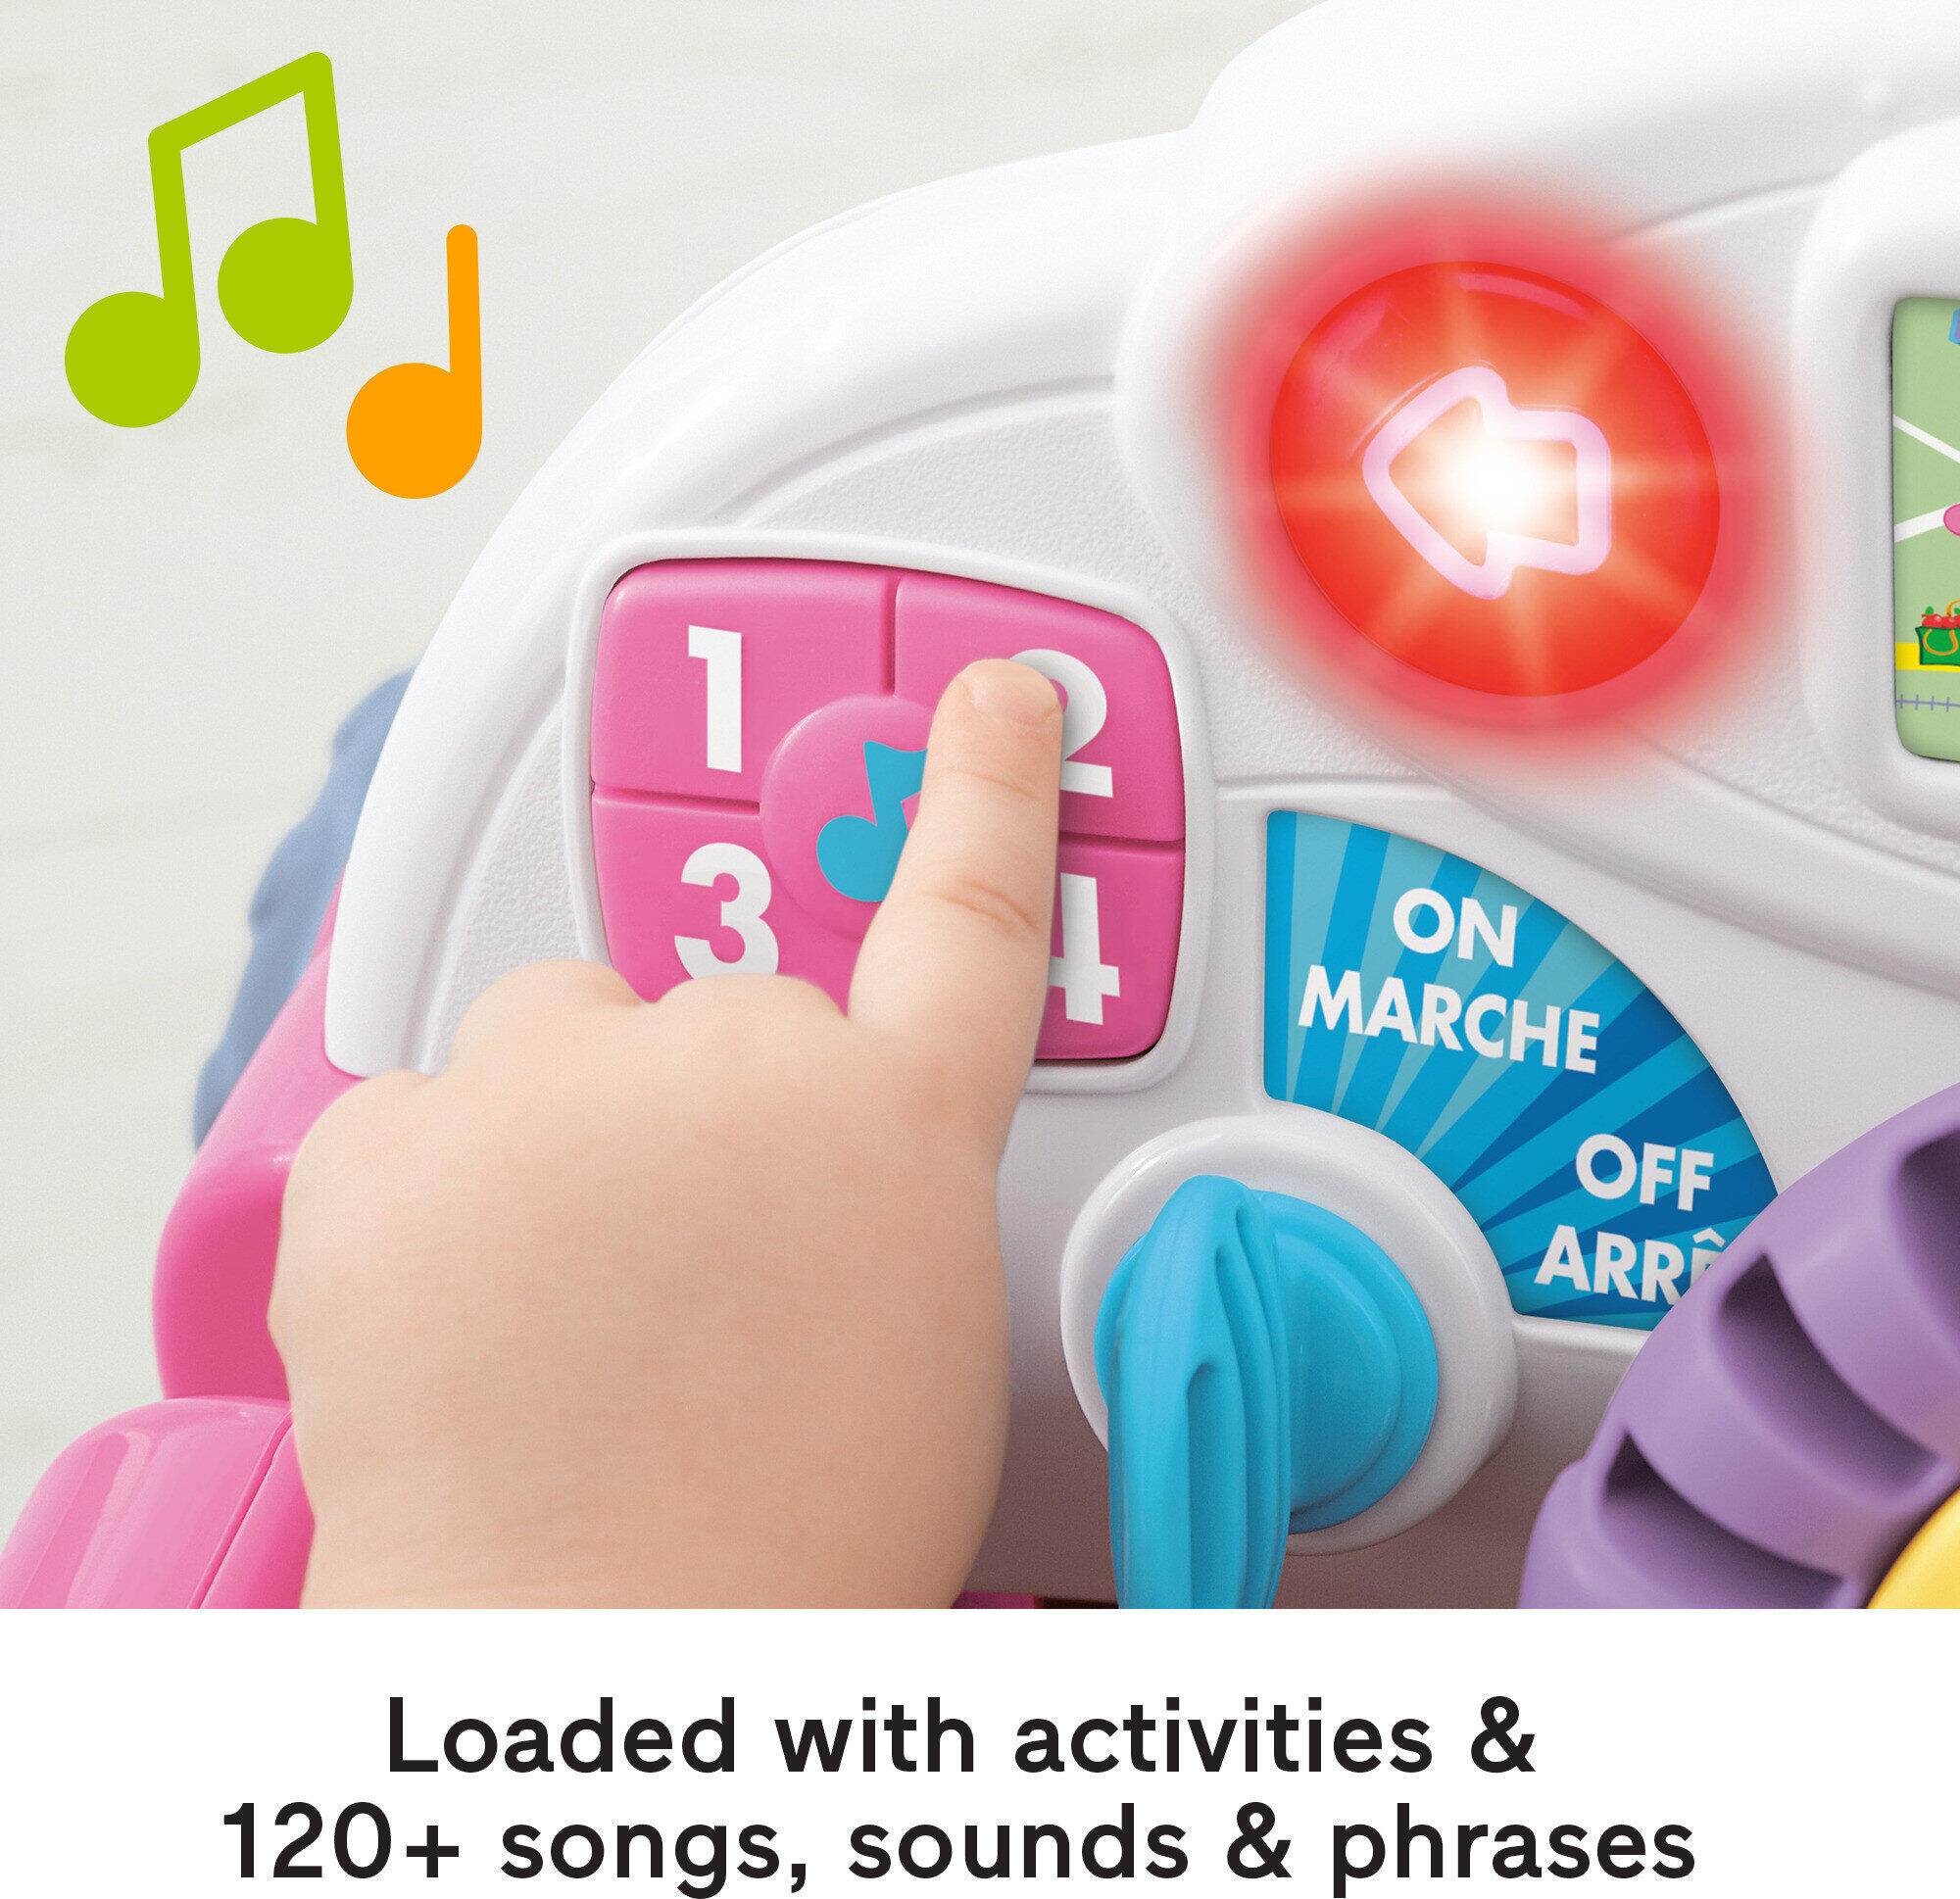 Fisher-Price Laugh & Learn Crawl Around Car, Electronic Learning Toy Activity Center for Baby, Pink - image 5 of 7